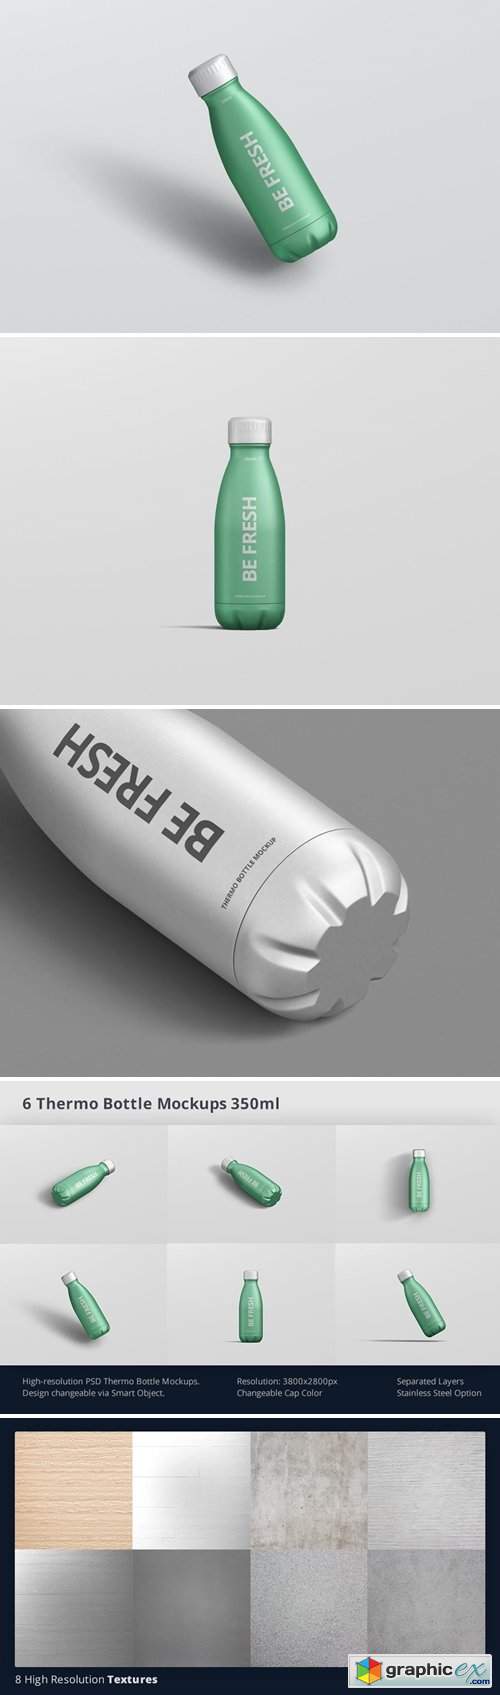 Download Thermo Bottle Mockup 350ml Free Download Vector Stock Image Photoshop Icon